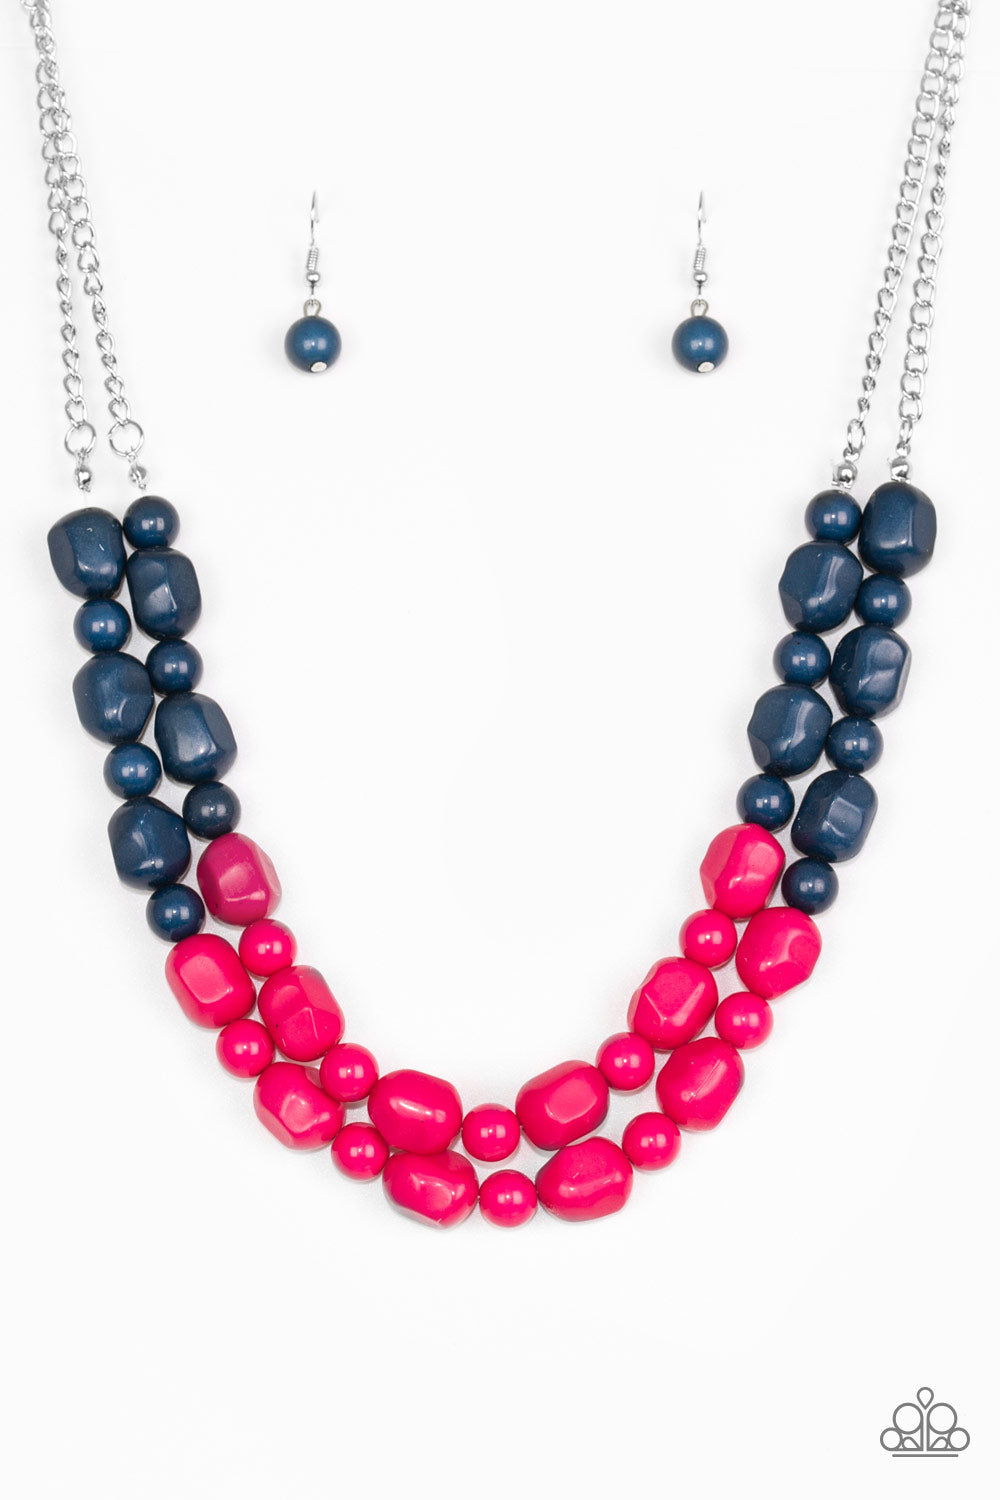 Paparazzi Accessories  - Island Excursion  #N99 Pink & Navy Necklace